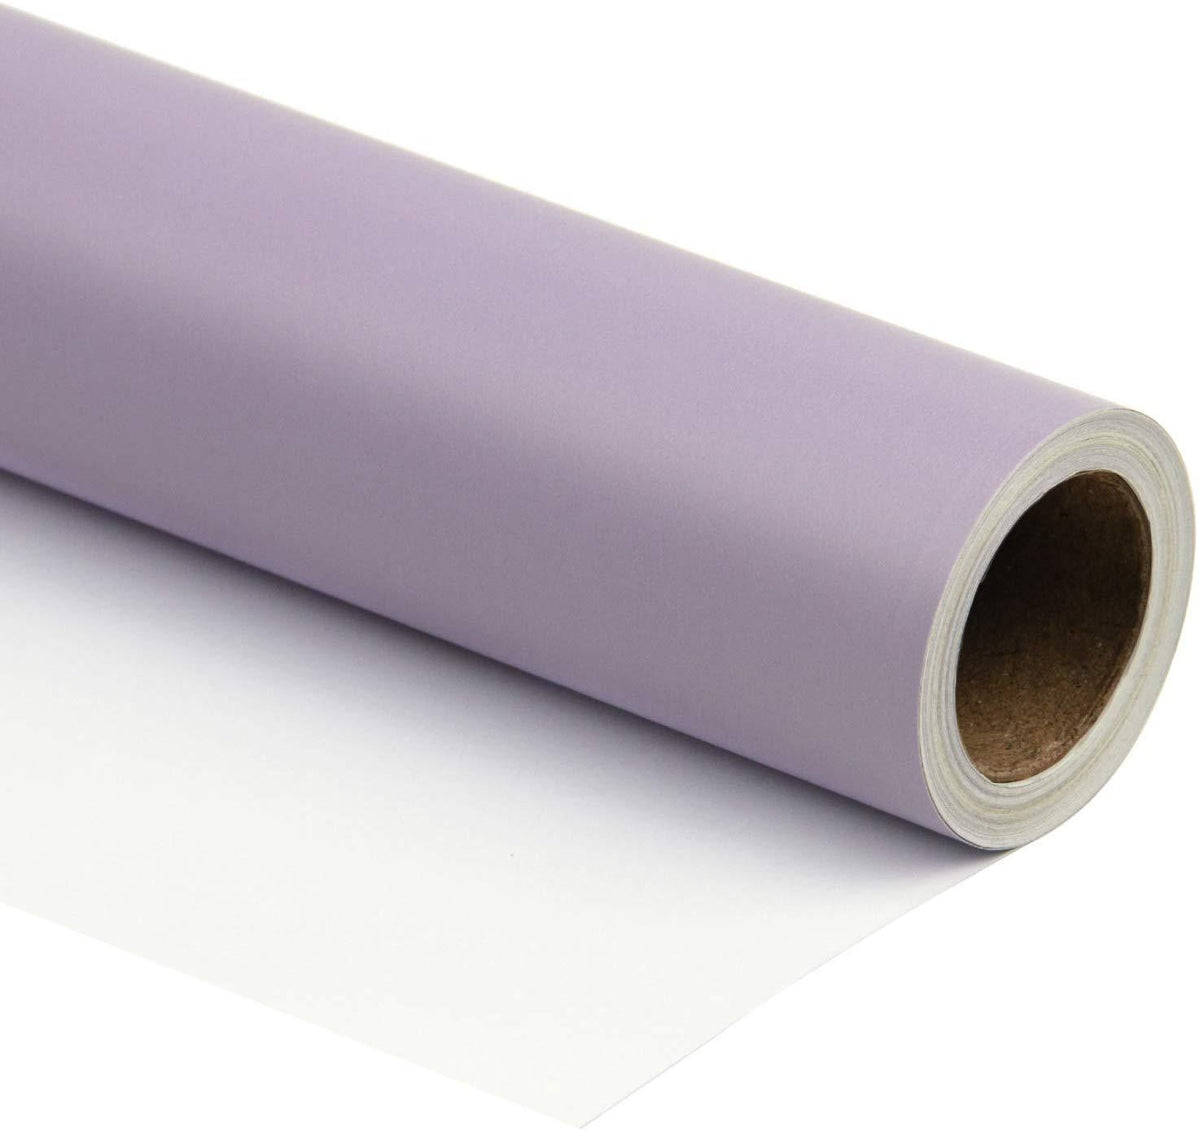 Glossy Wrapping Paper Roll, Light Purple 32.8' – WrapaholicGifts